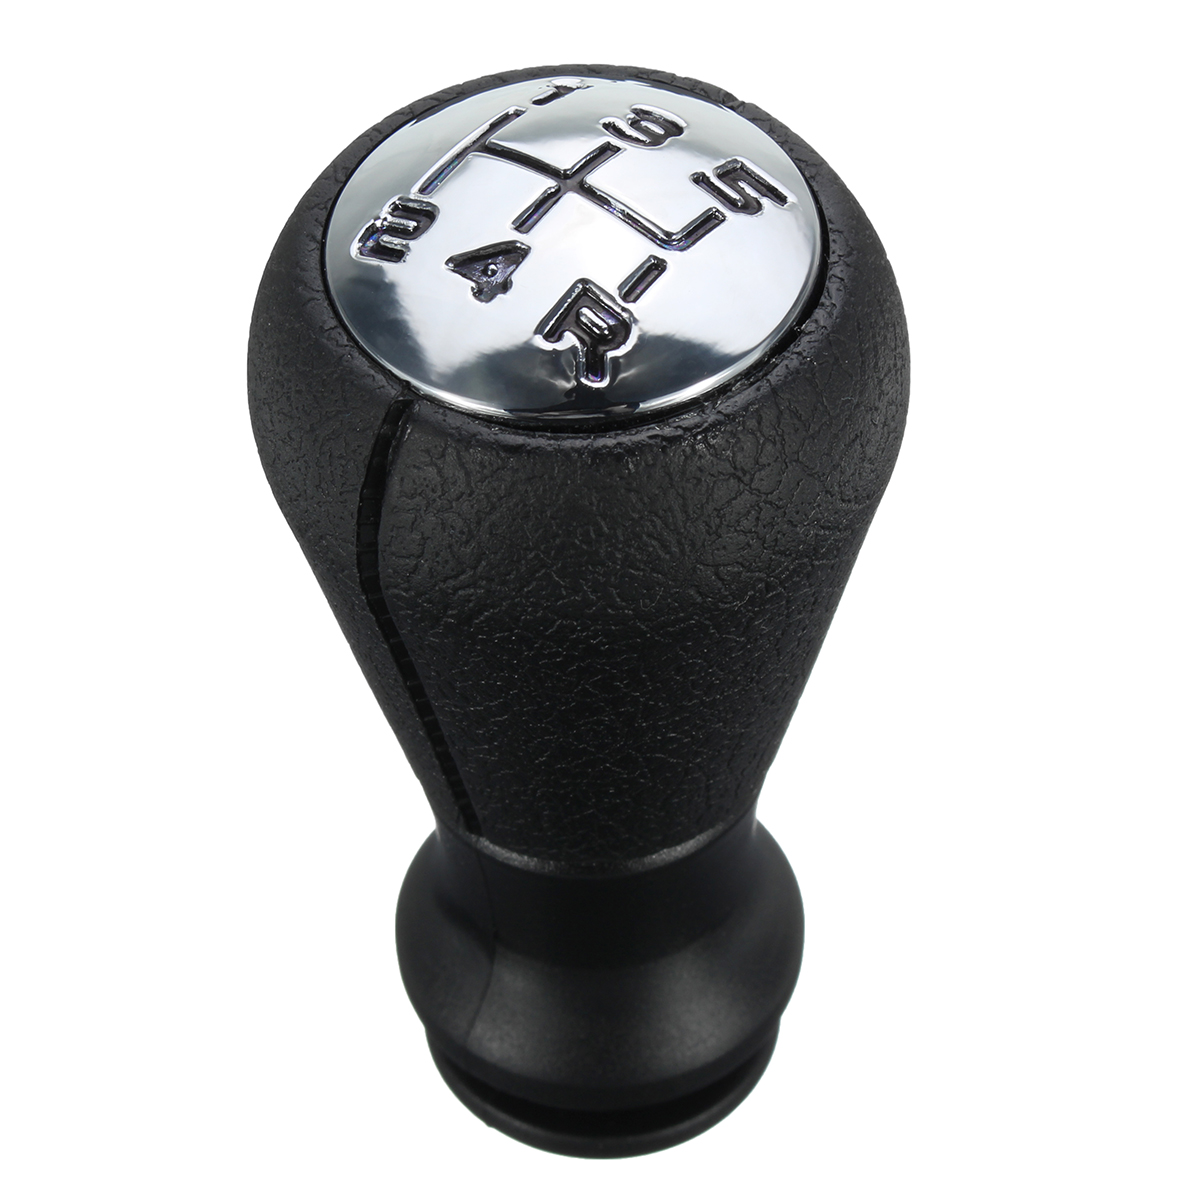   5 Speed Manual Car Gear Shift Knob For Peugeot 106 206 306 406 806 107 207 307